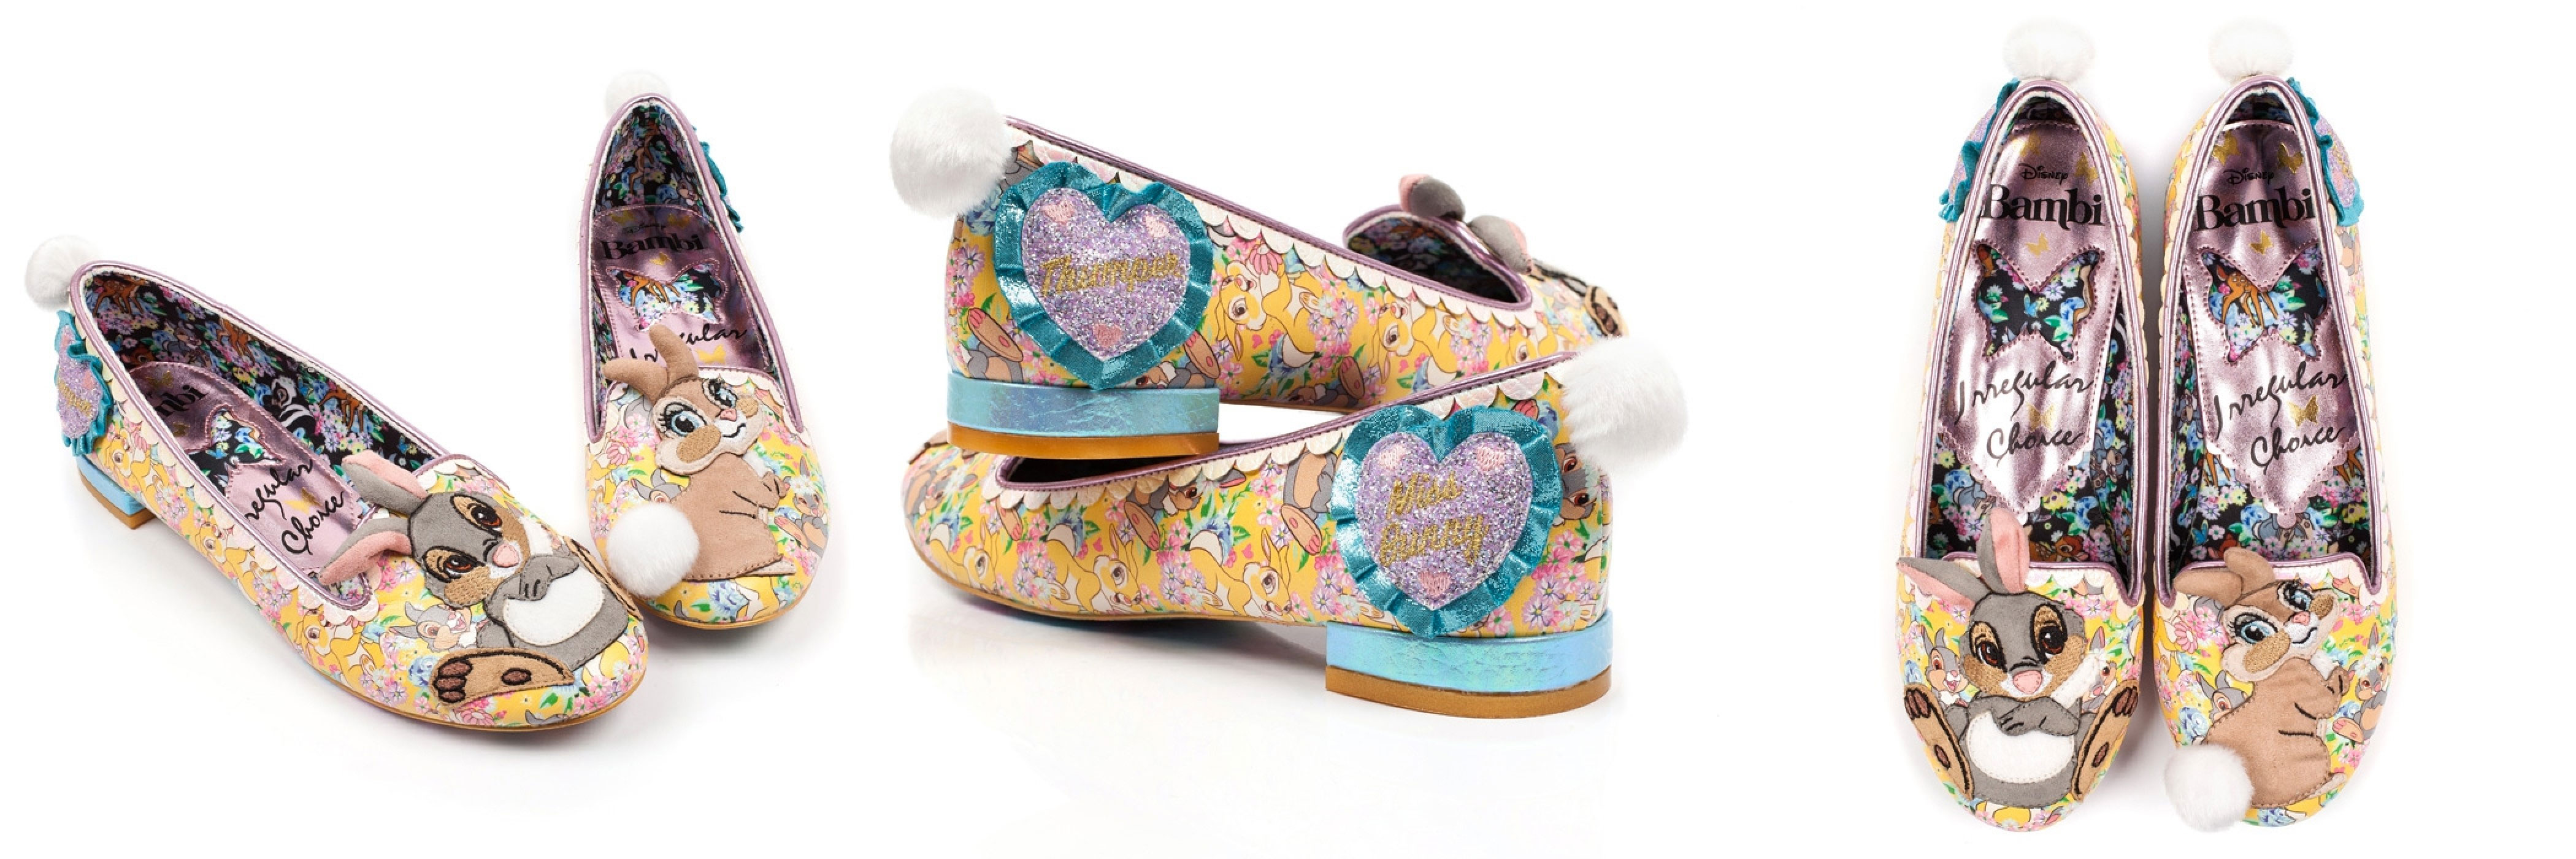 Irregular Choice x Bambi Shoes - Sweet As Can Be Thumper Flat Shoes